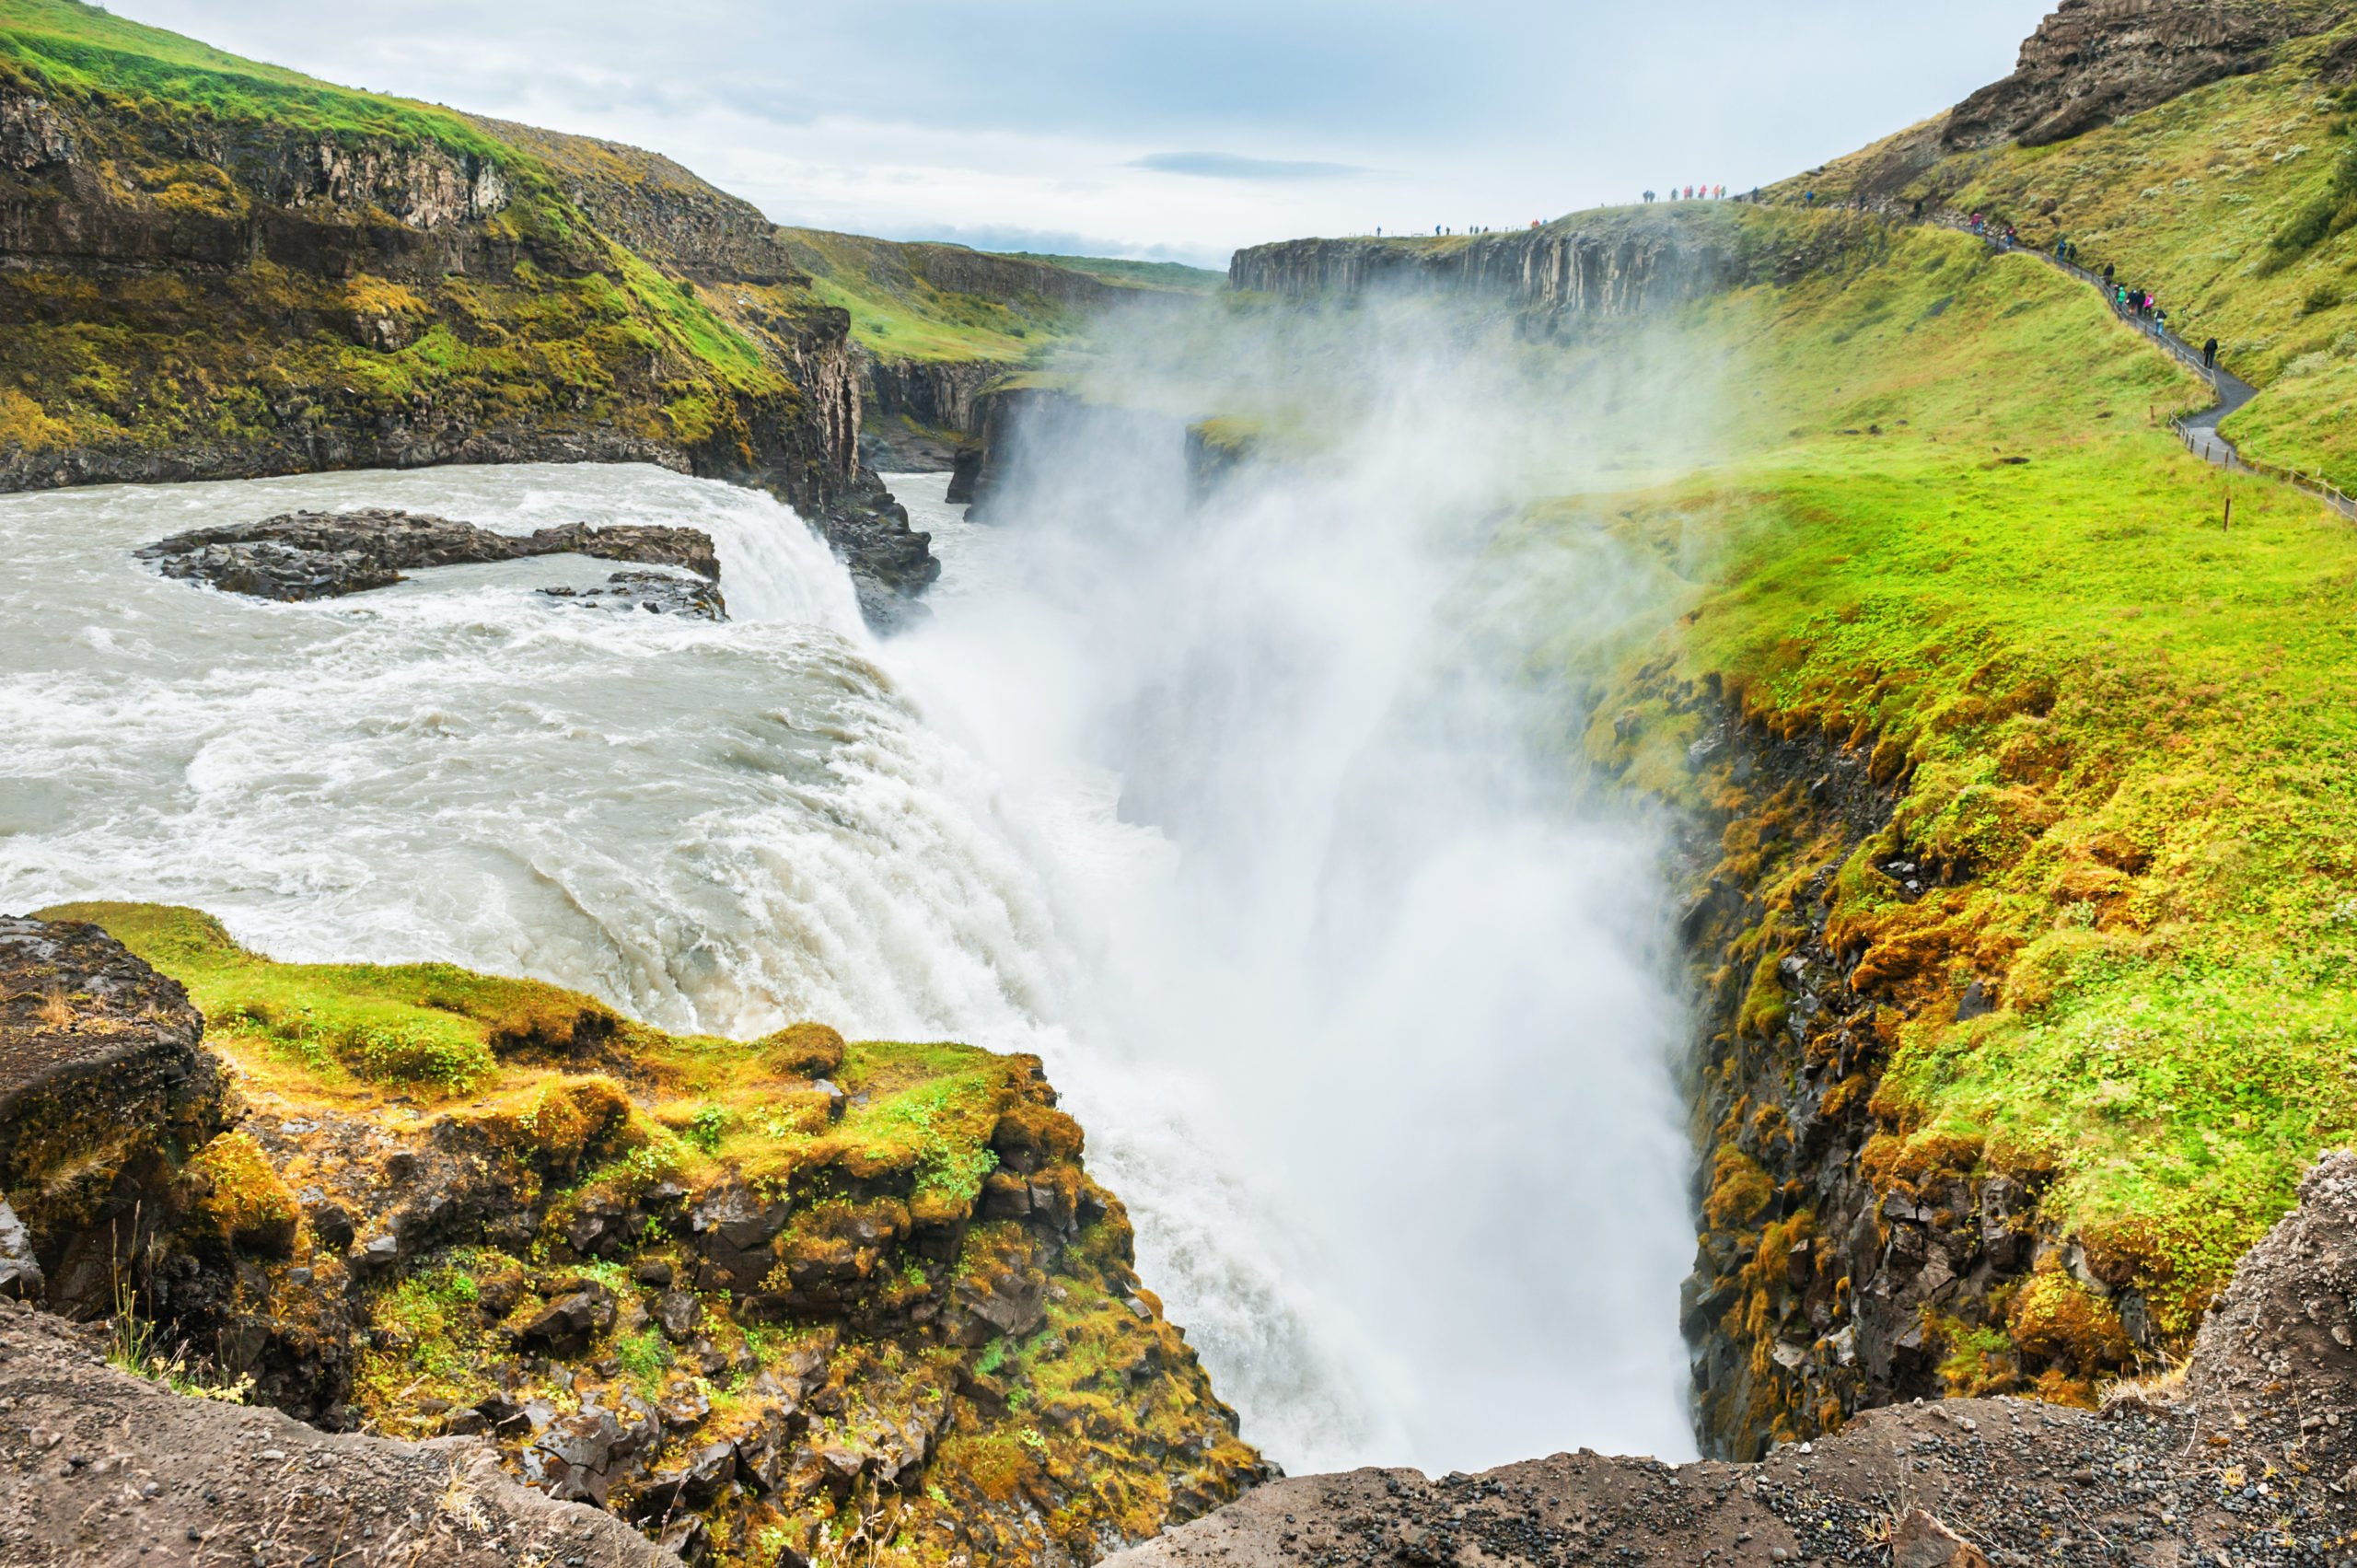 Enjoy The Views Of Gullfoss Waterfall On Your Golden Circle And Secret Lagoon Day Tour